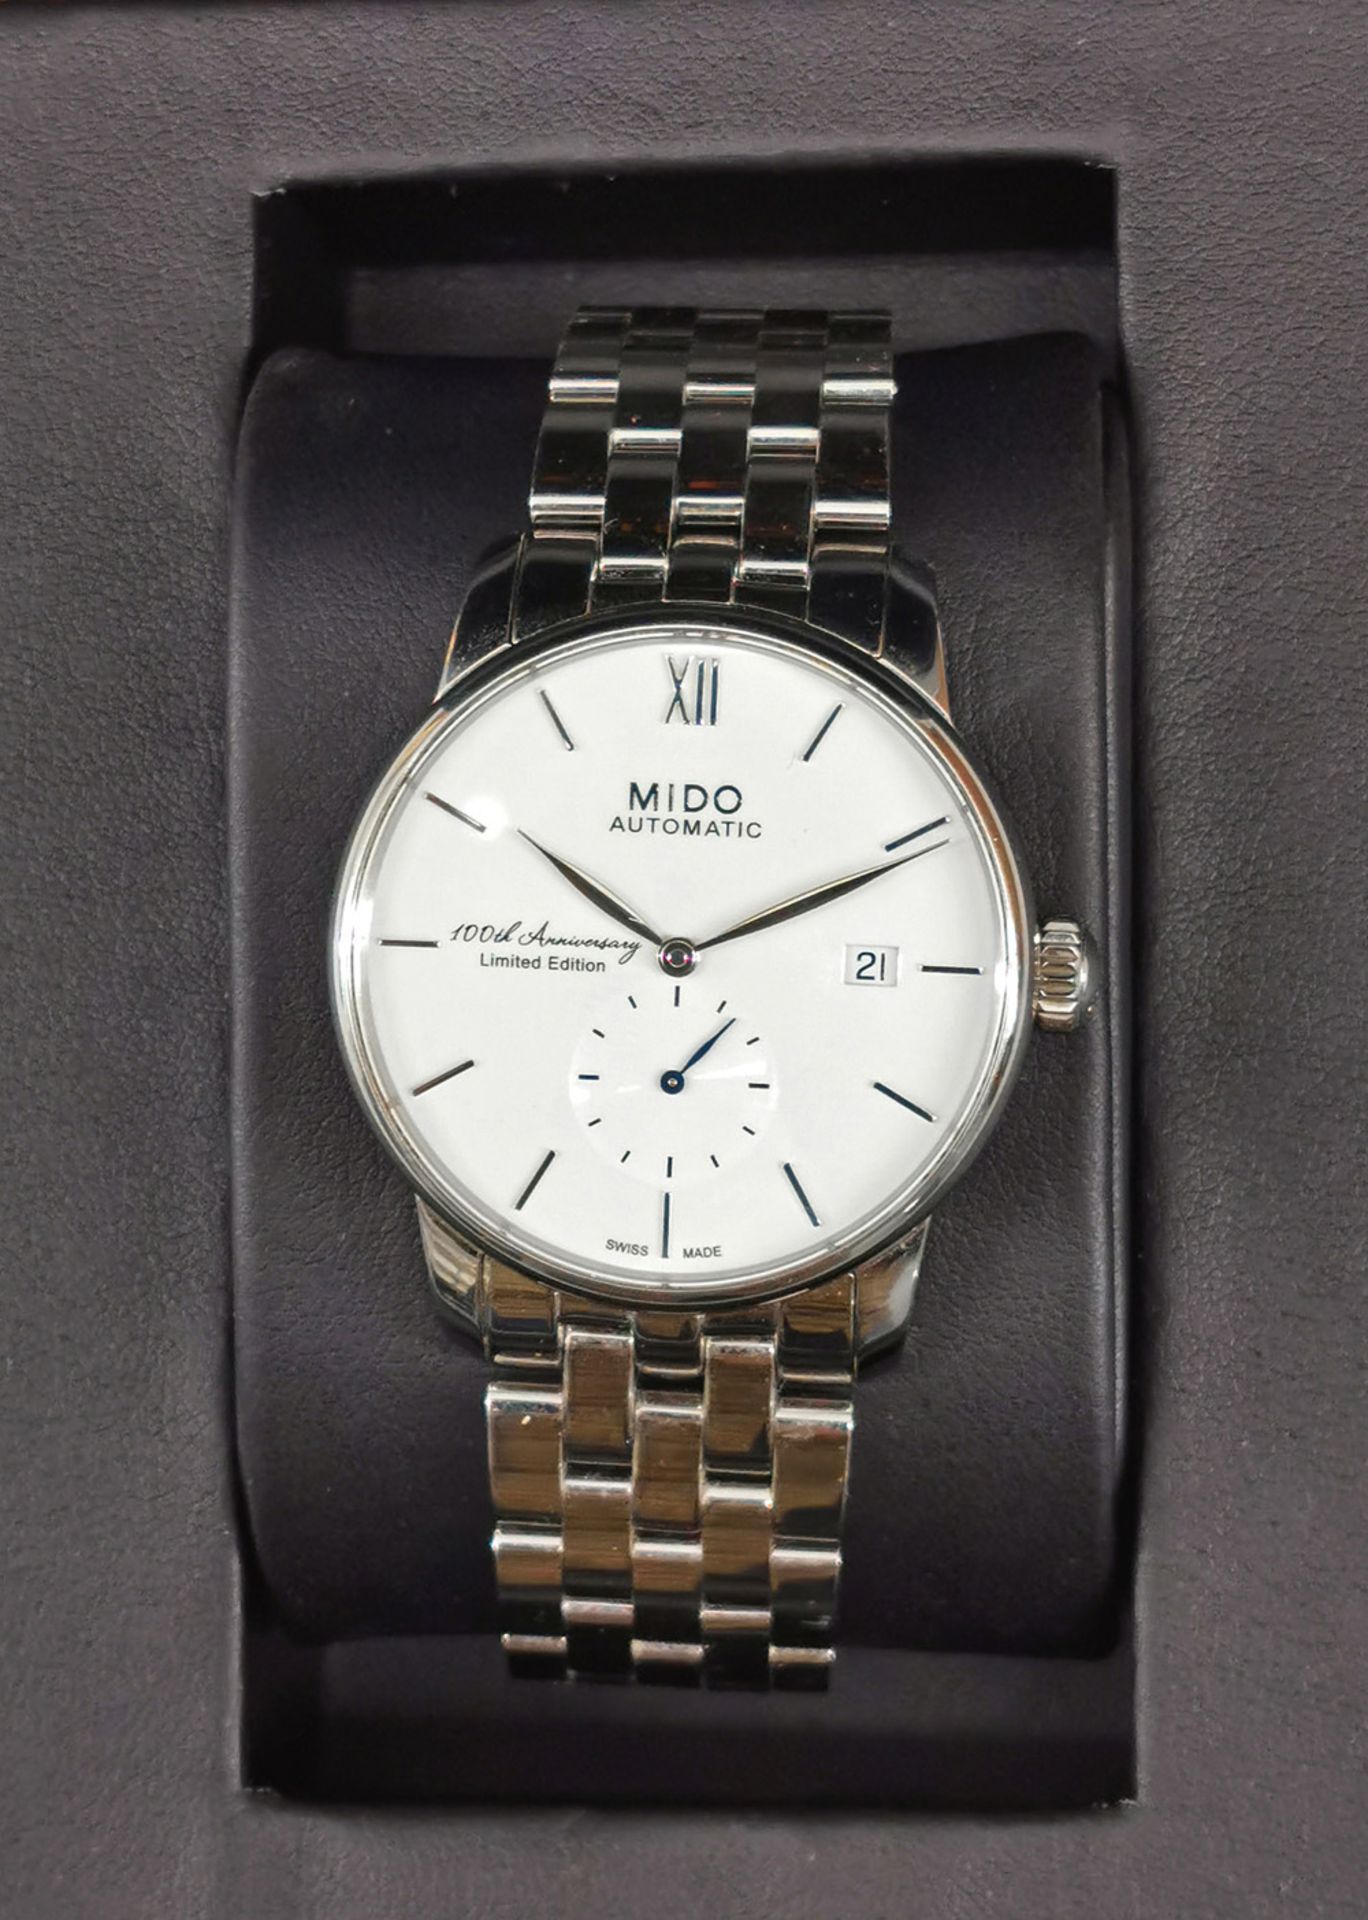 Mido Automatic Baroncelli Uhr 100th Anniversary Limited Edition - Image 2 of 2